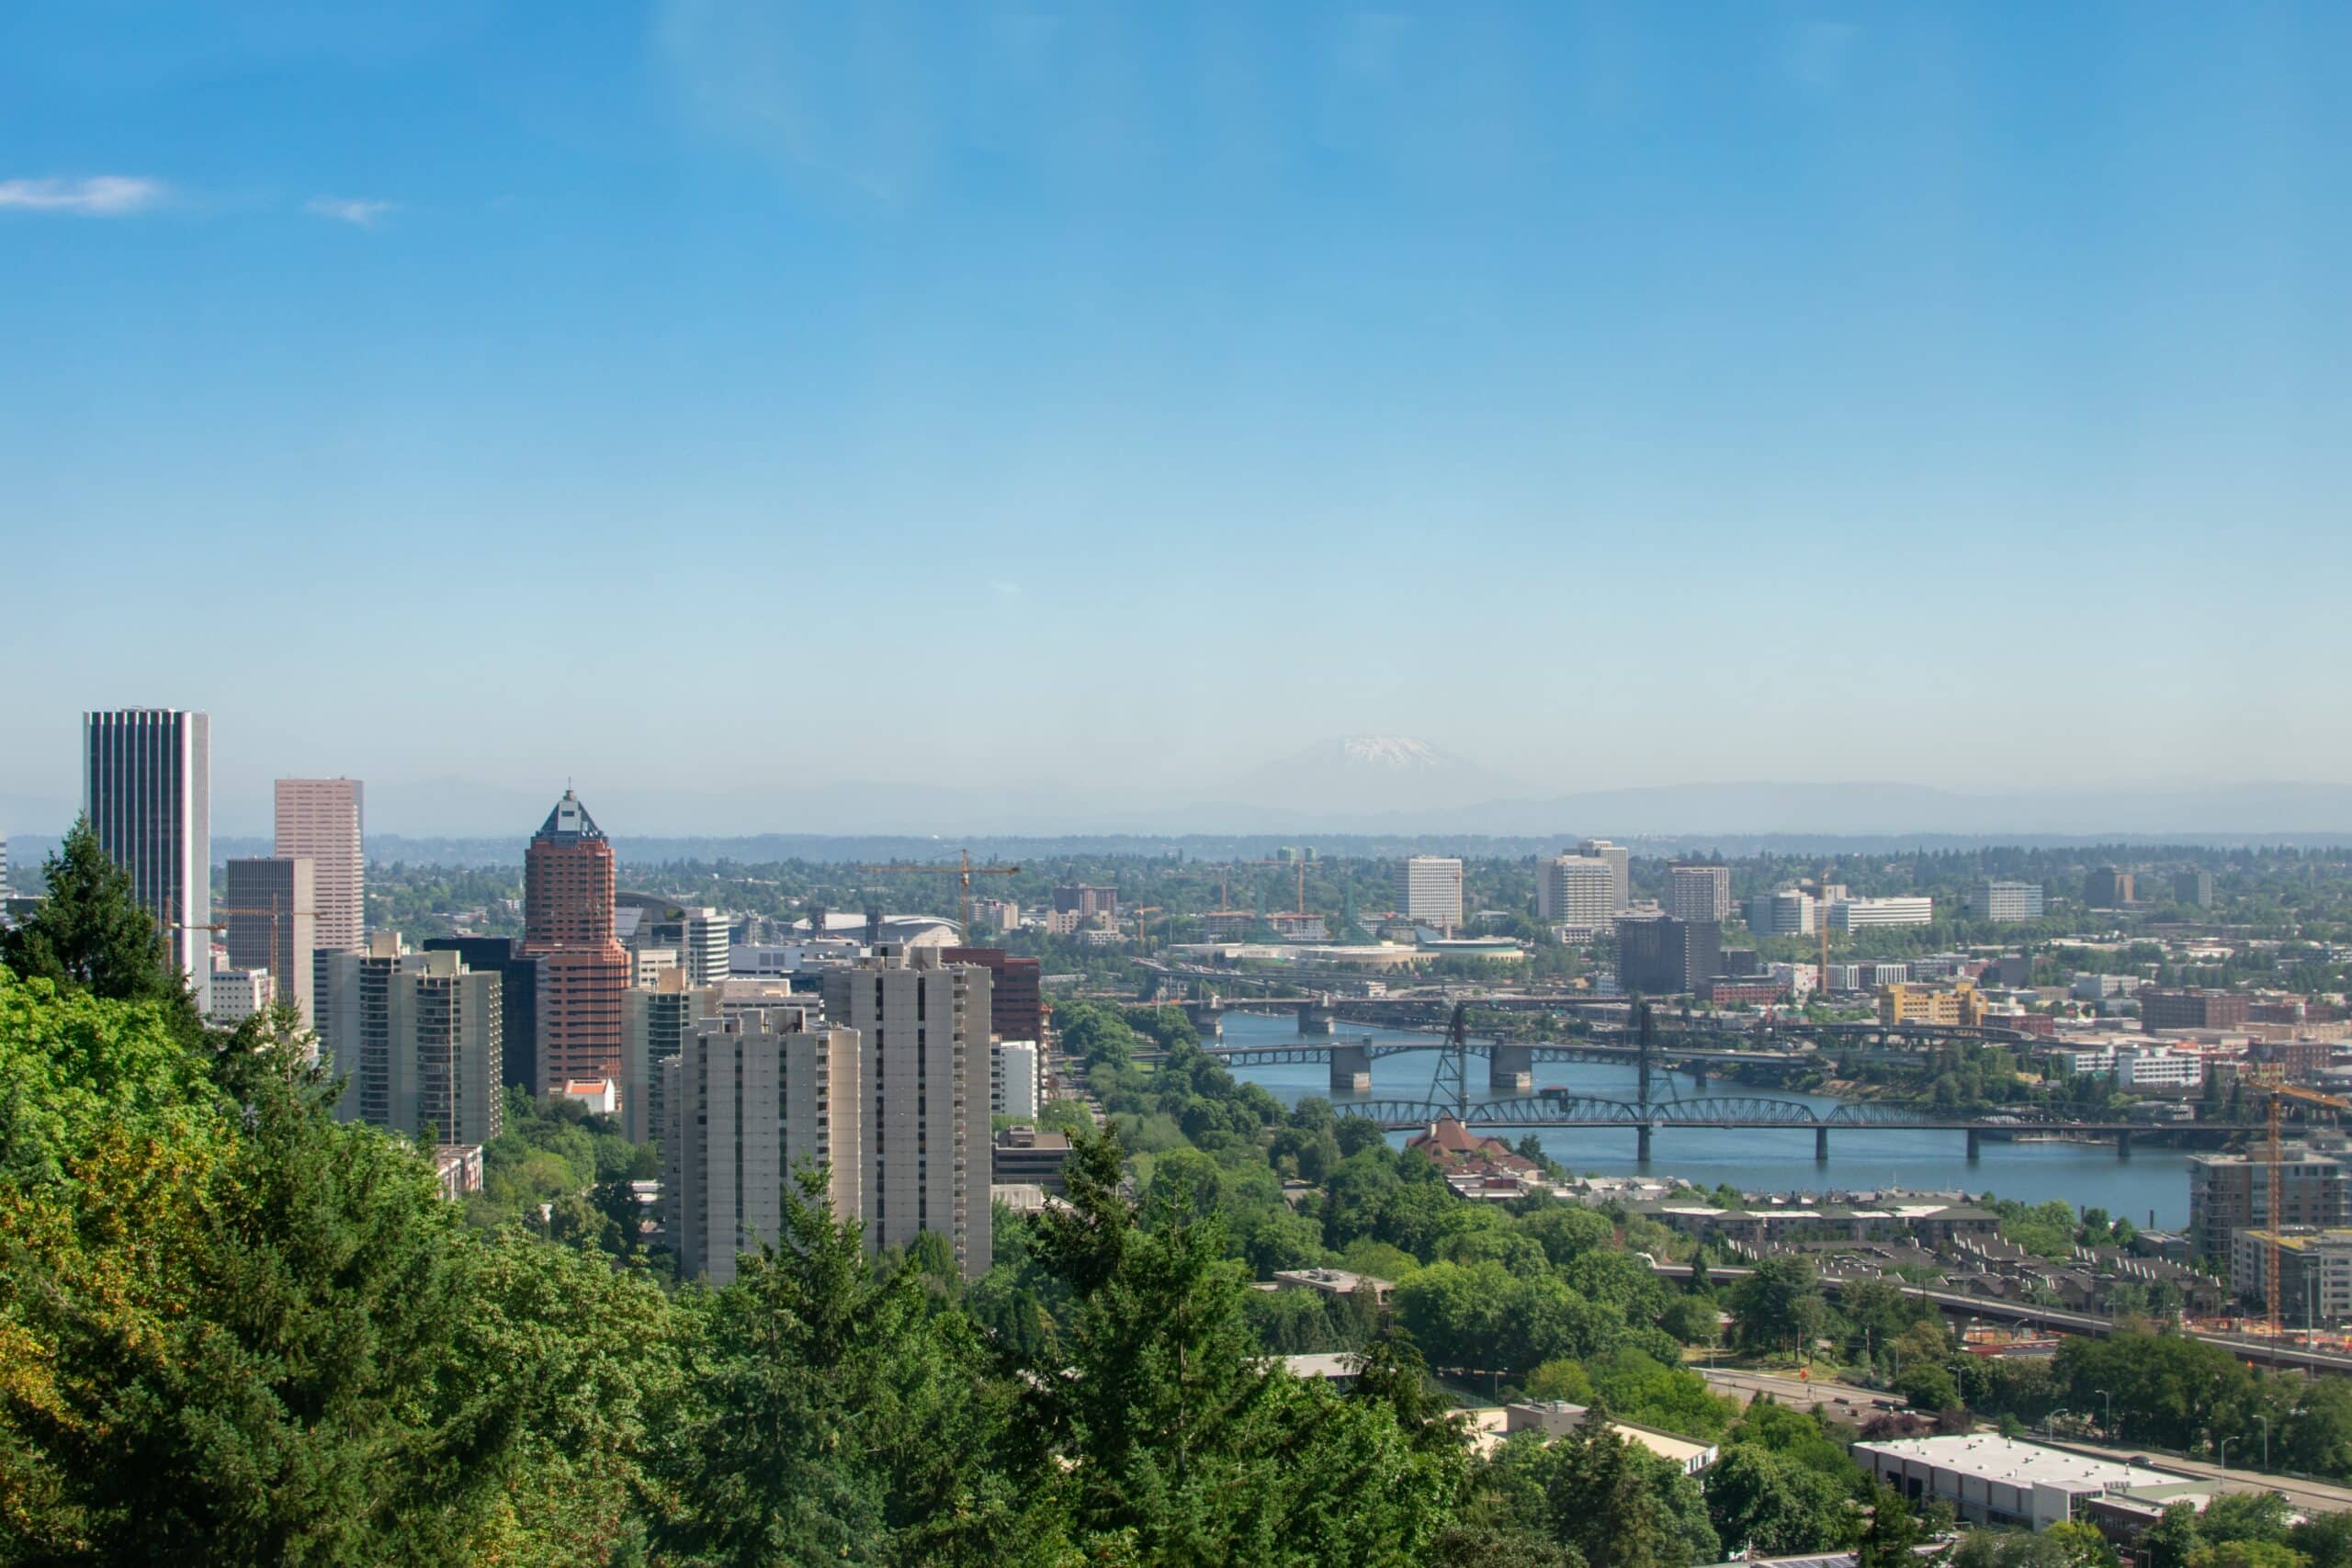 A landscape shot of Portland's skyline. The Willamette River is visible in frame, as are a smattering of skyscrapers on the left hand side of the screen. Trees pepper each area.